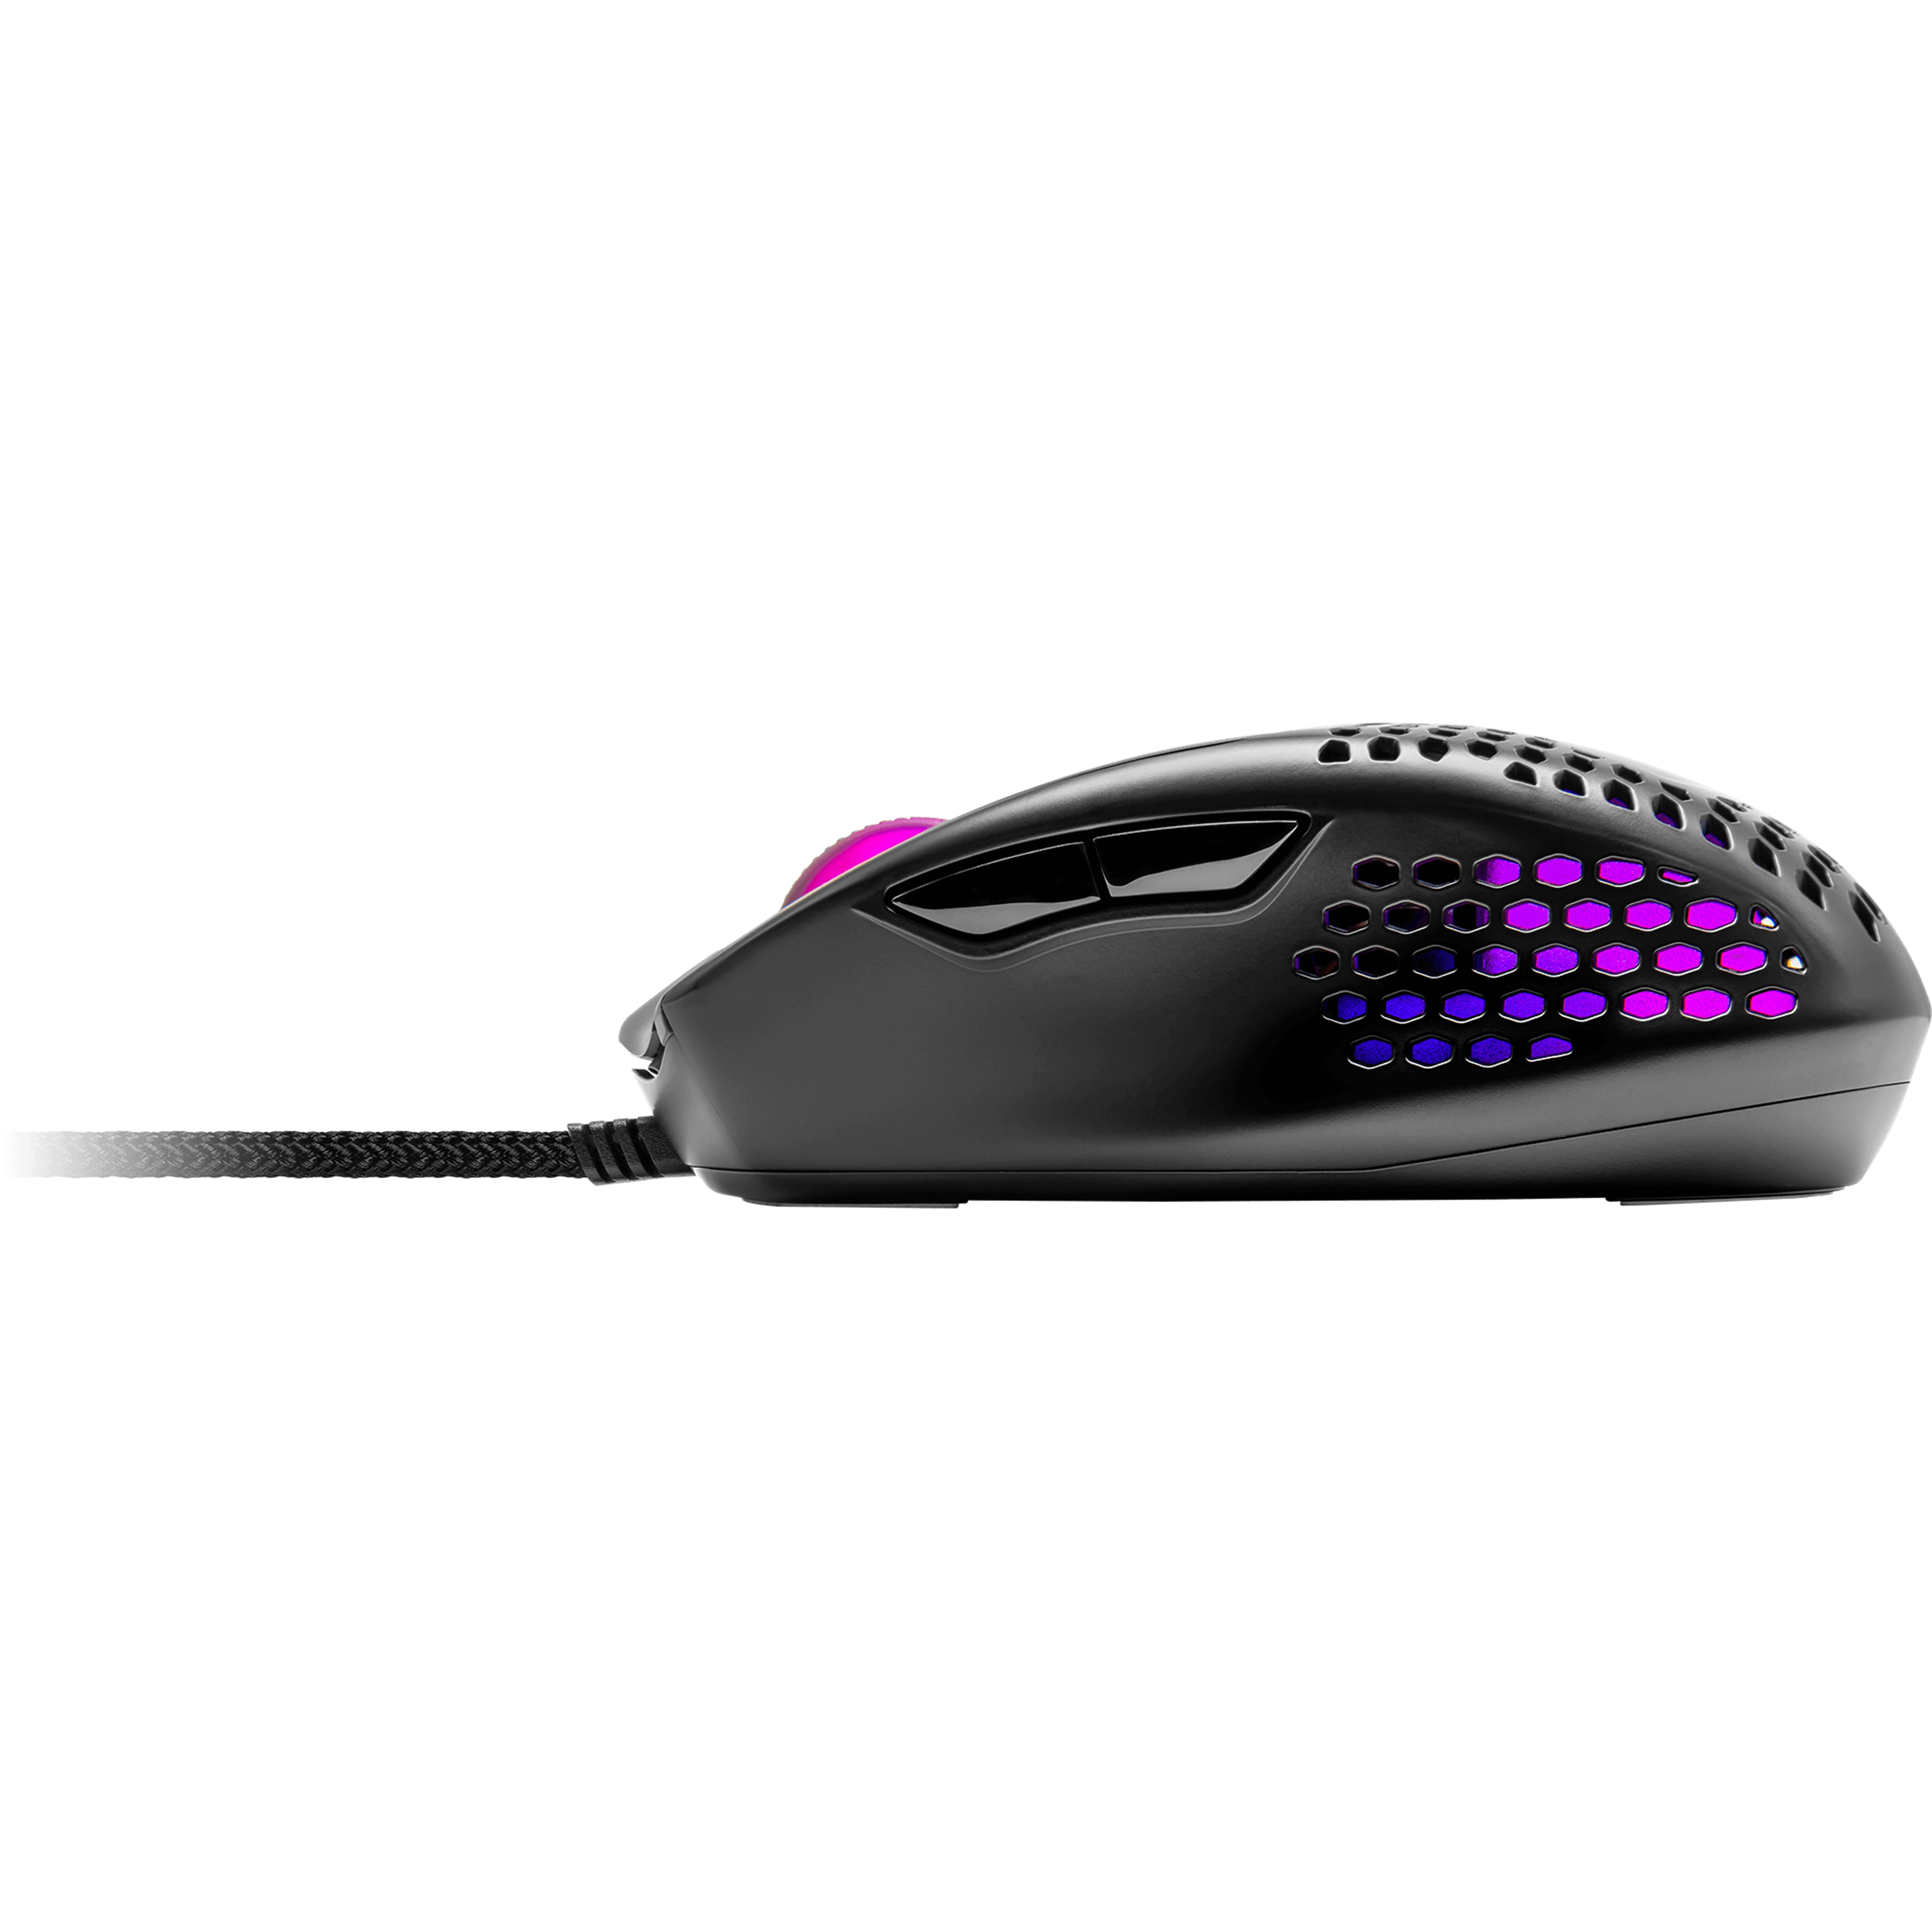 MM720 RGB Gaming Mouse | Cooler Master